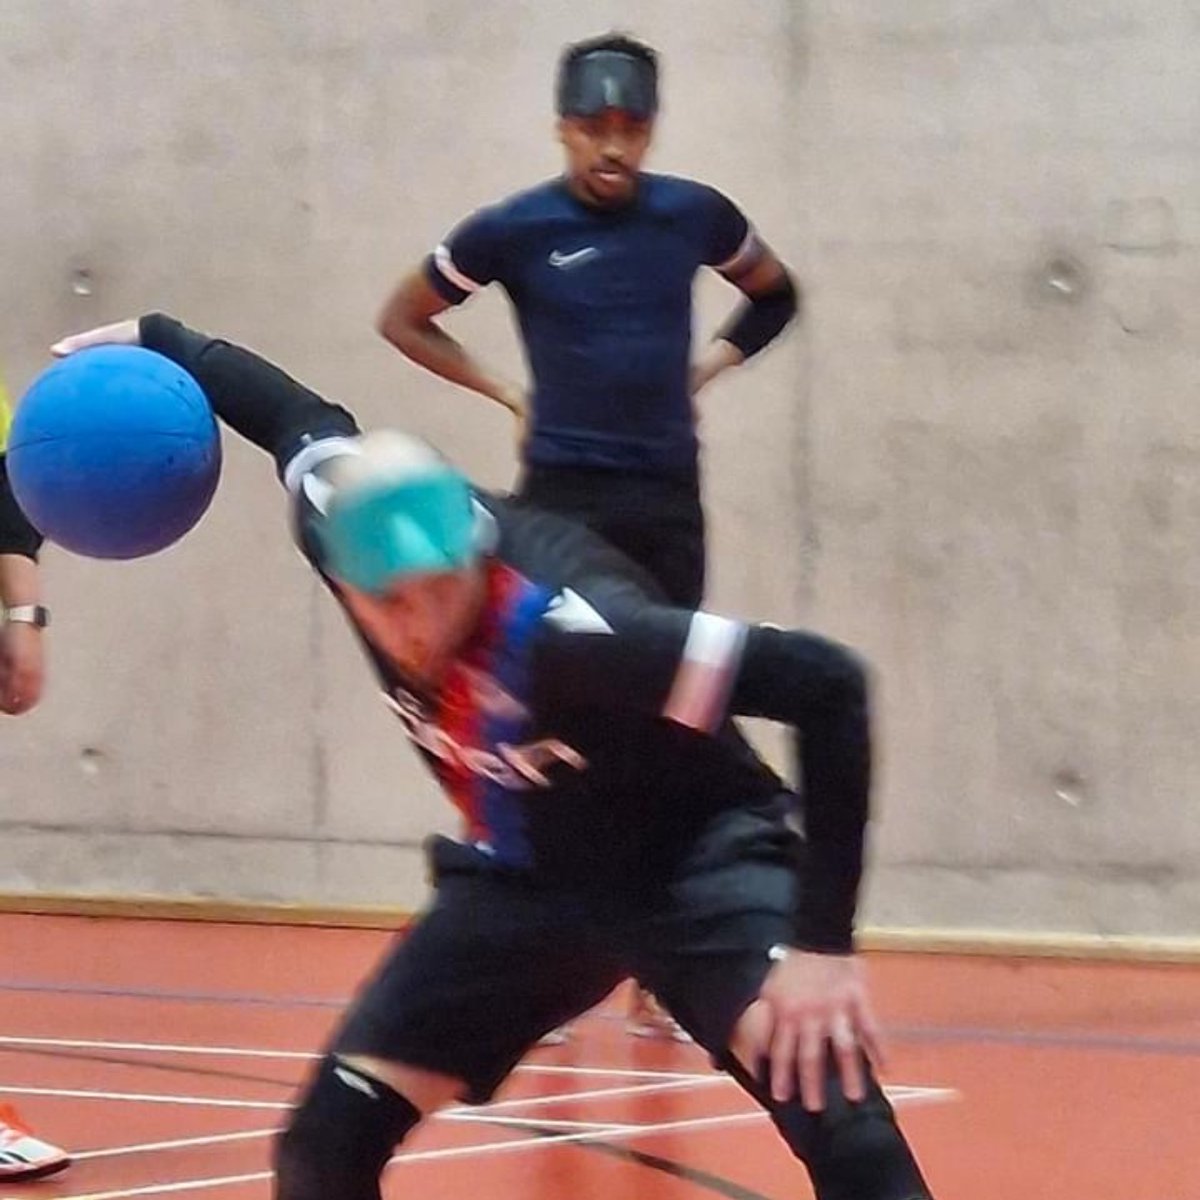 Fancy trying Goalball? why not come along to the Croysutt warriors goalball club on Monday evenings at: Invictus Harris Academy 88 London Rd, Croydon CR0 2TB 6-9pm We welcome all ages and abilities or if you fancy volunteering then get in touch with the warriors.